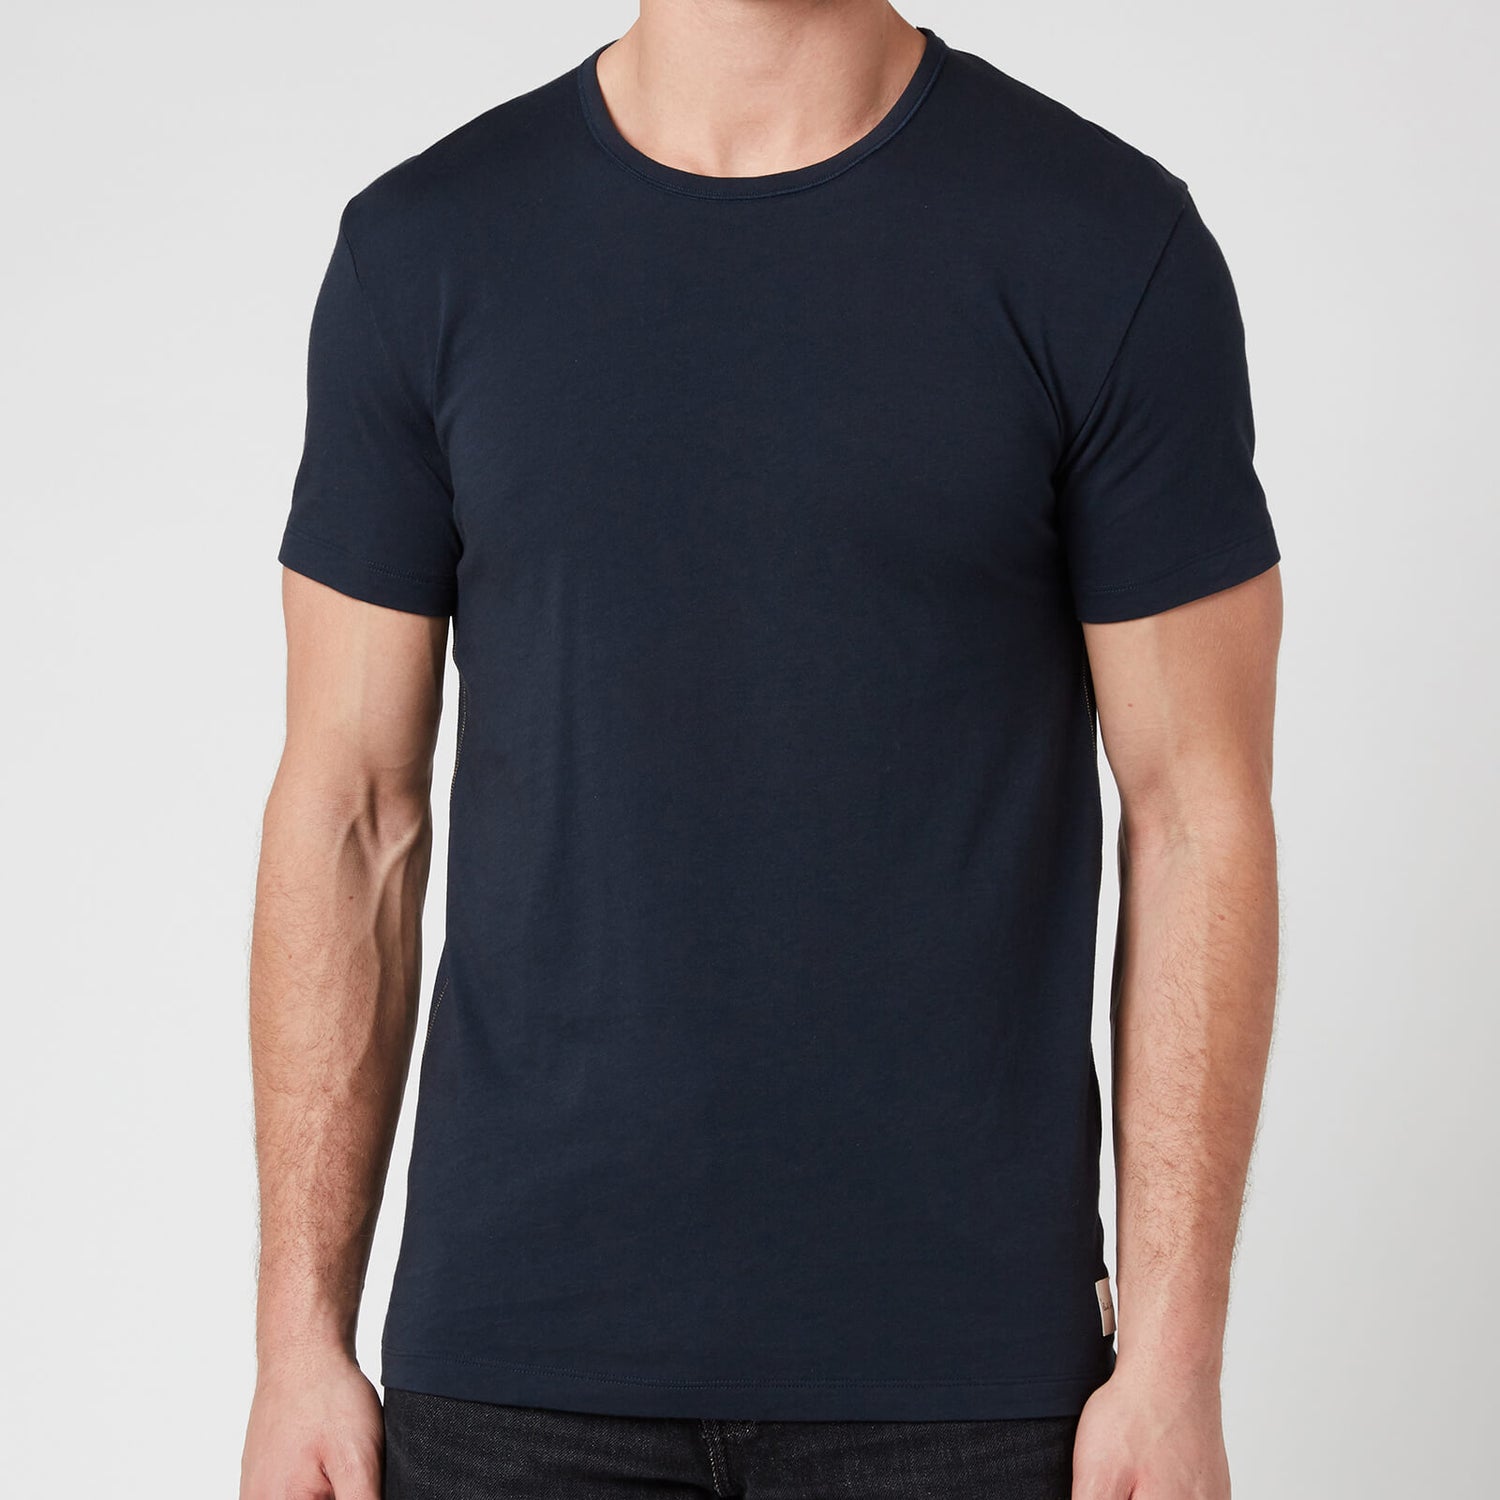 PS Paul Smith Men's Crewneck T-Shirt - Navy - Free UK Delivery Available